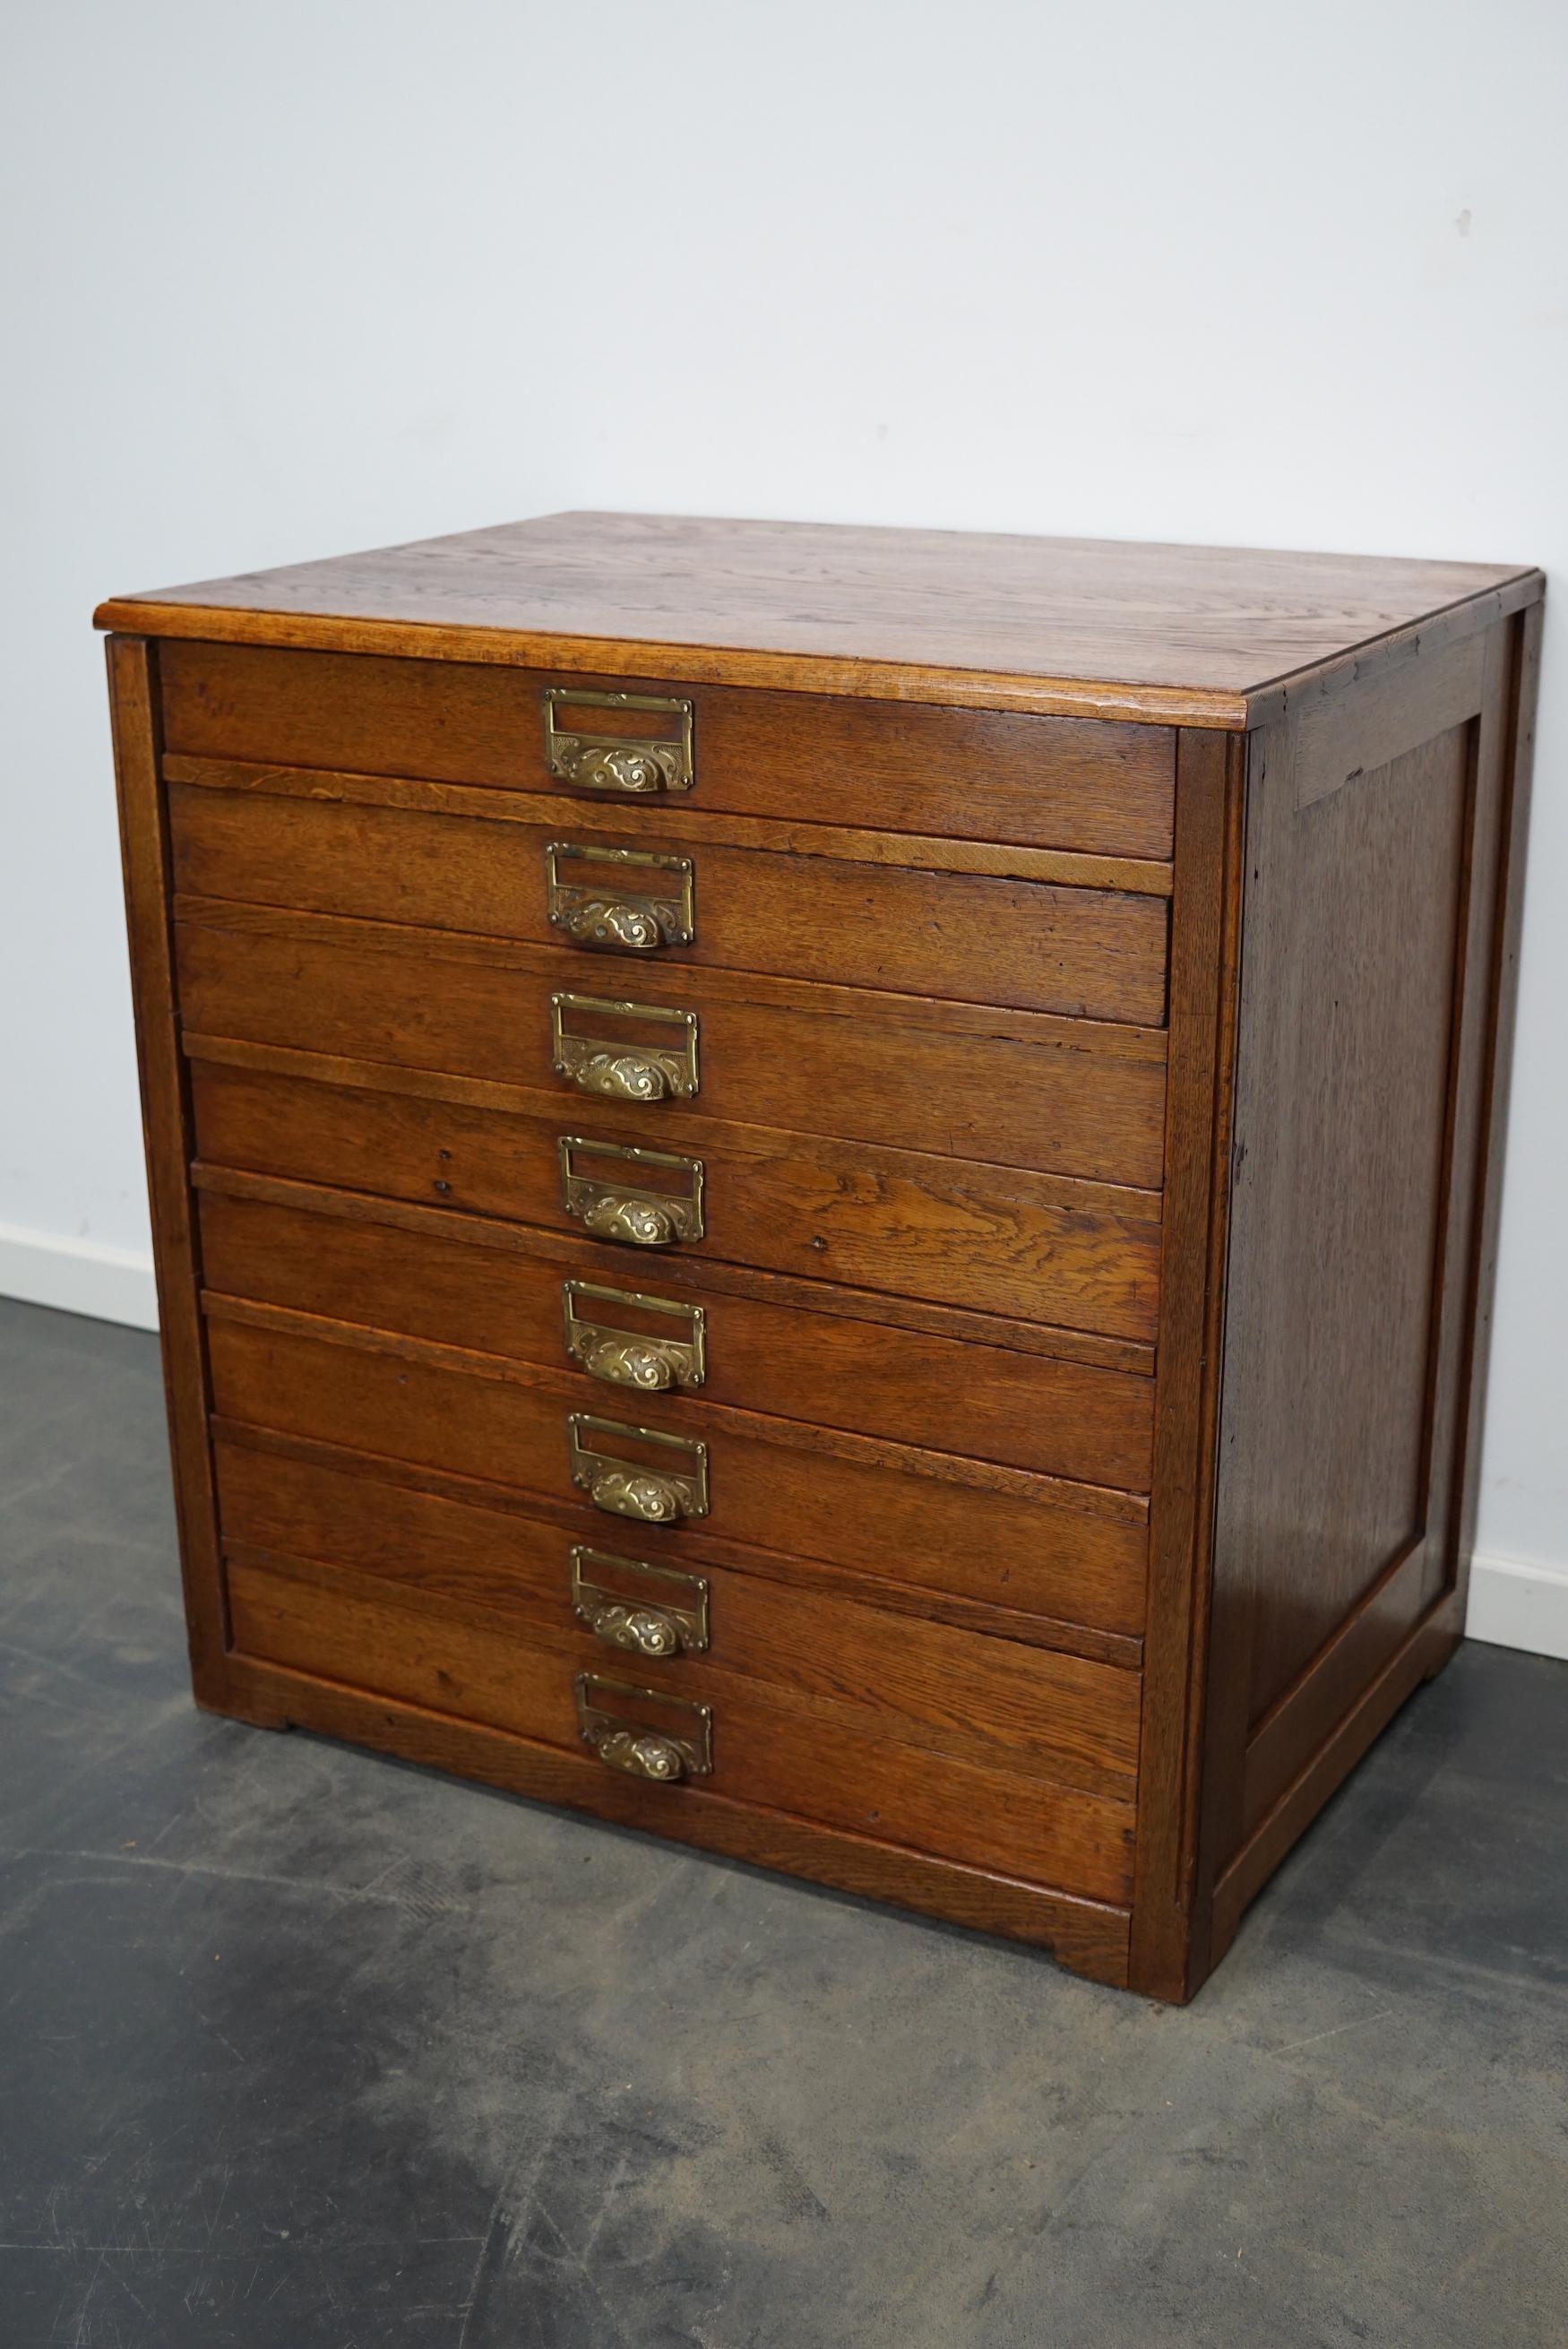 Very nice Dutch oak plan chest that features 8 drawers with very nice brass hardware. It is very well made and in a good antique condition. The interior dimension of the drawers are: DWH 50 x 69 x 6 cm.